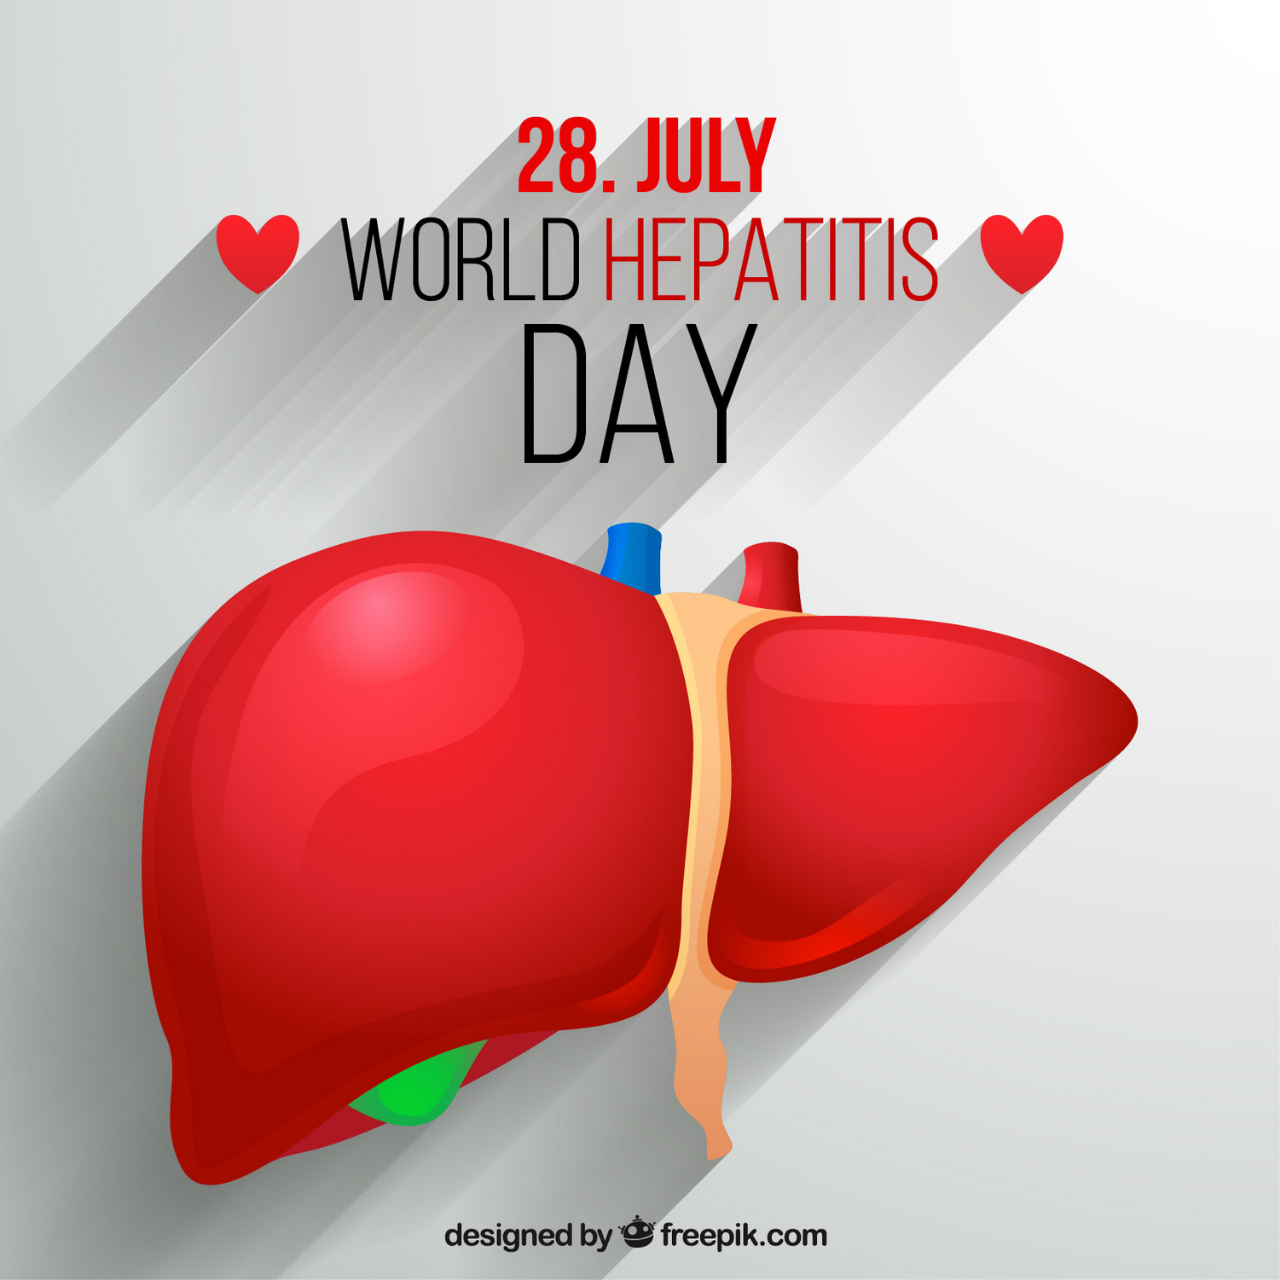 World Hepatitis Day 2021 Poster, Quotes, Images, Messages, Drawing, and Status to create awareness